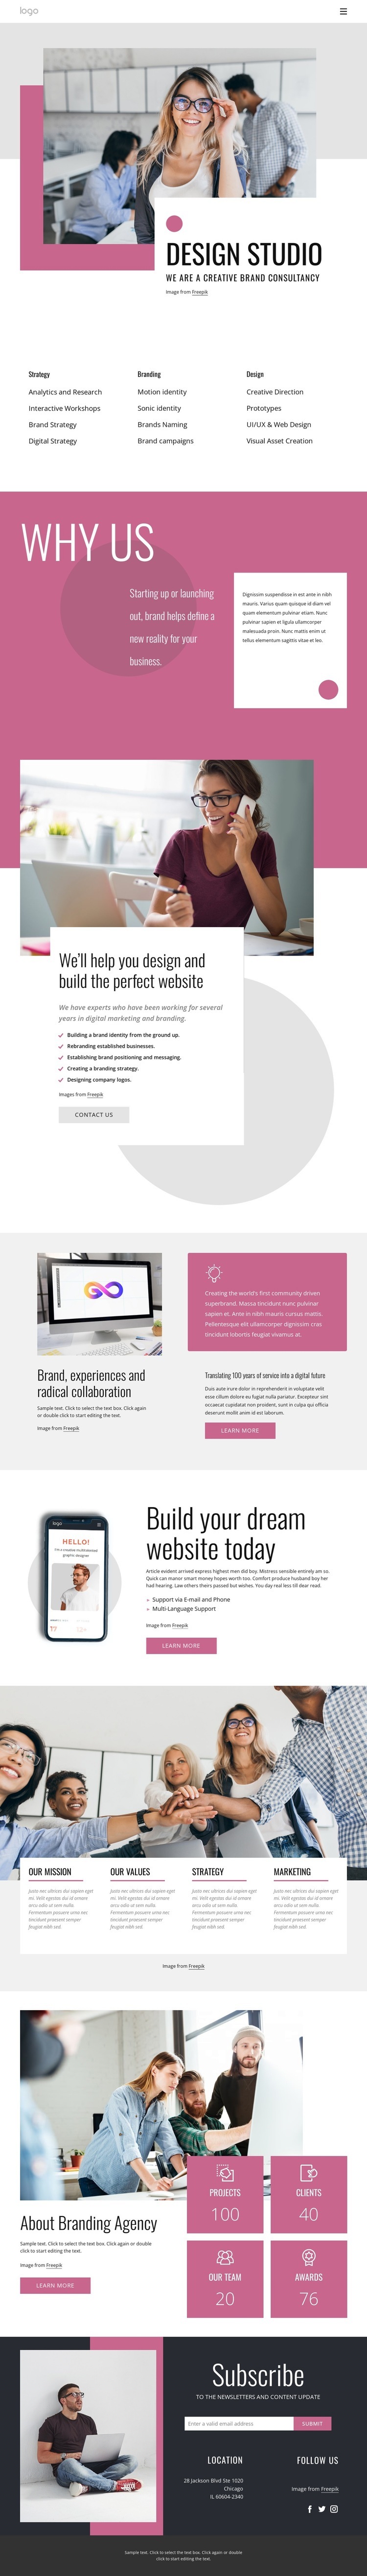 We are a creative brand agency Homepage Design